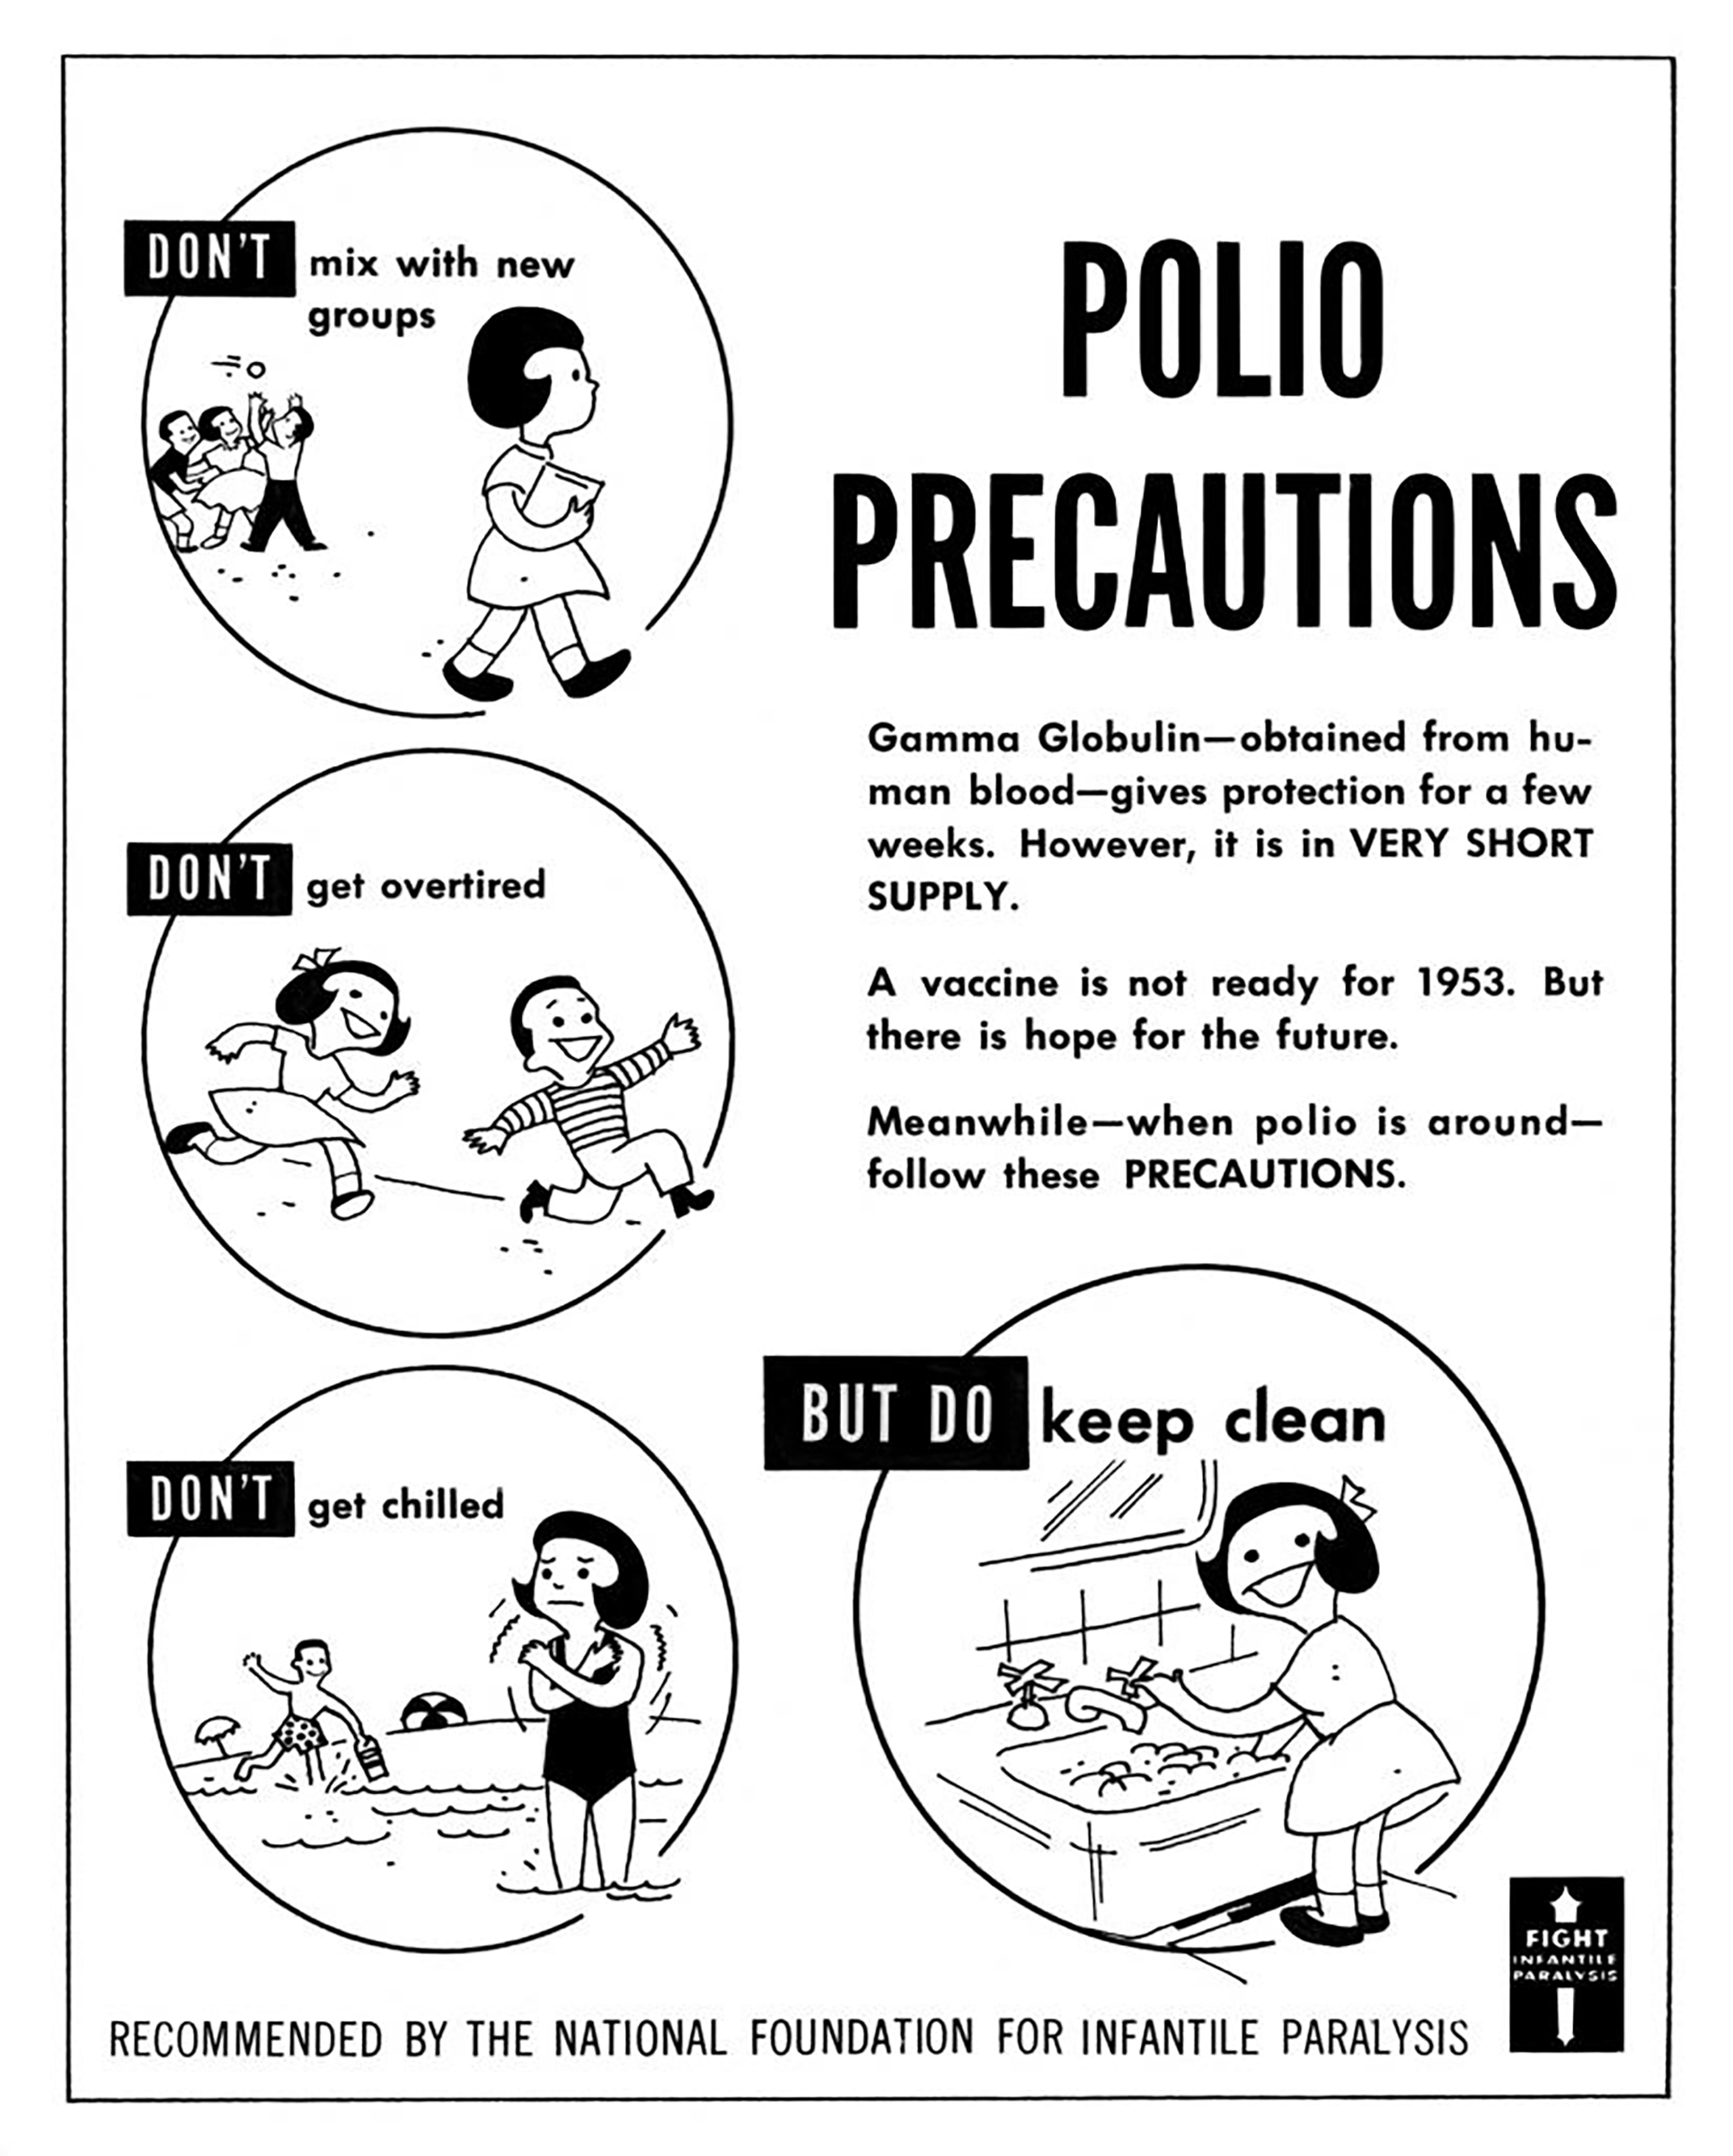 Polio Poster Cartoon developed by the National Foundation for Infantile Paralysis (early name for March of Dimes) in 1953 (Courtesy March of Dimes)